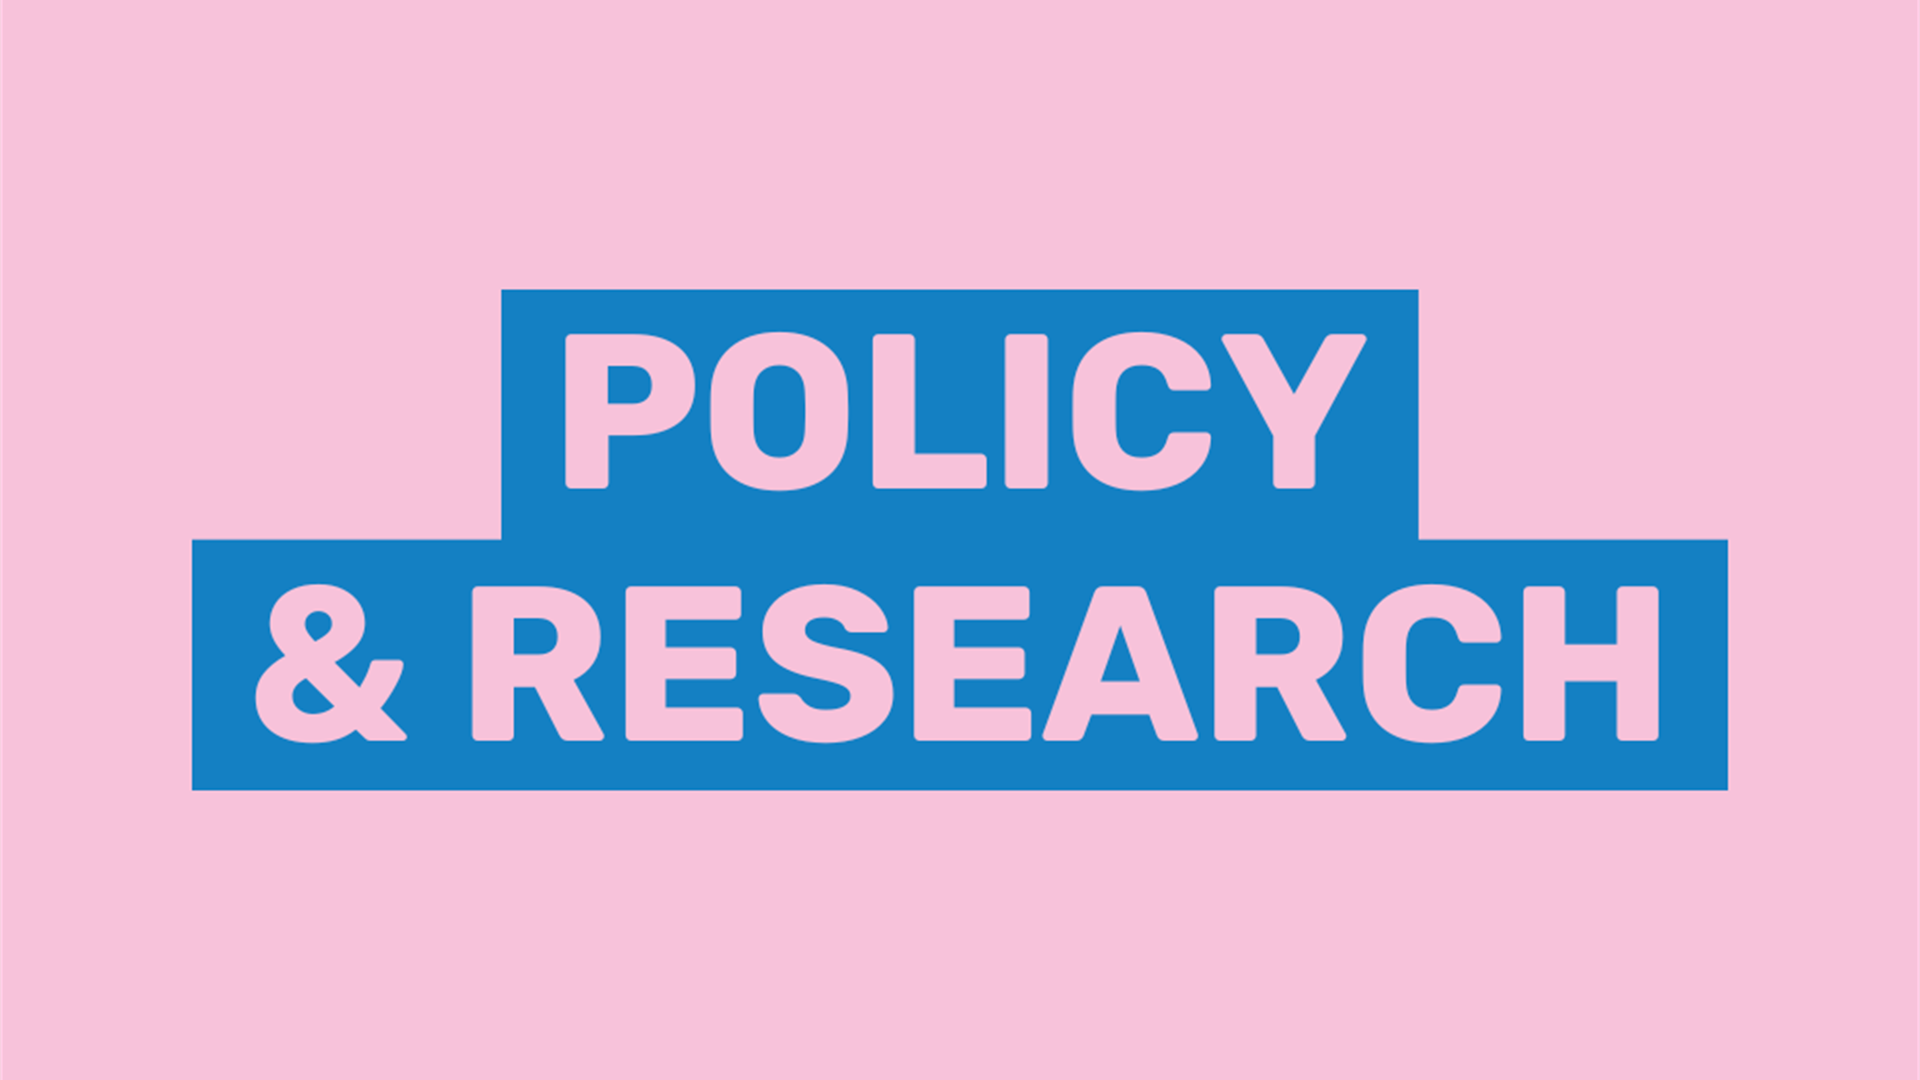 The Policy and Research department support the Officer team to prepare for committee meetings with University Leadership as well as leading and supporting research undertaken by Arts SU to better know the issues affecting our students. In the past we've released research on the Cost of Study, Decolonising the Curriculum, and Student Housing.